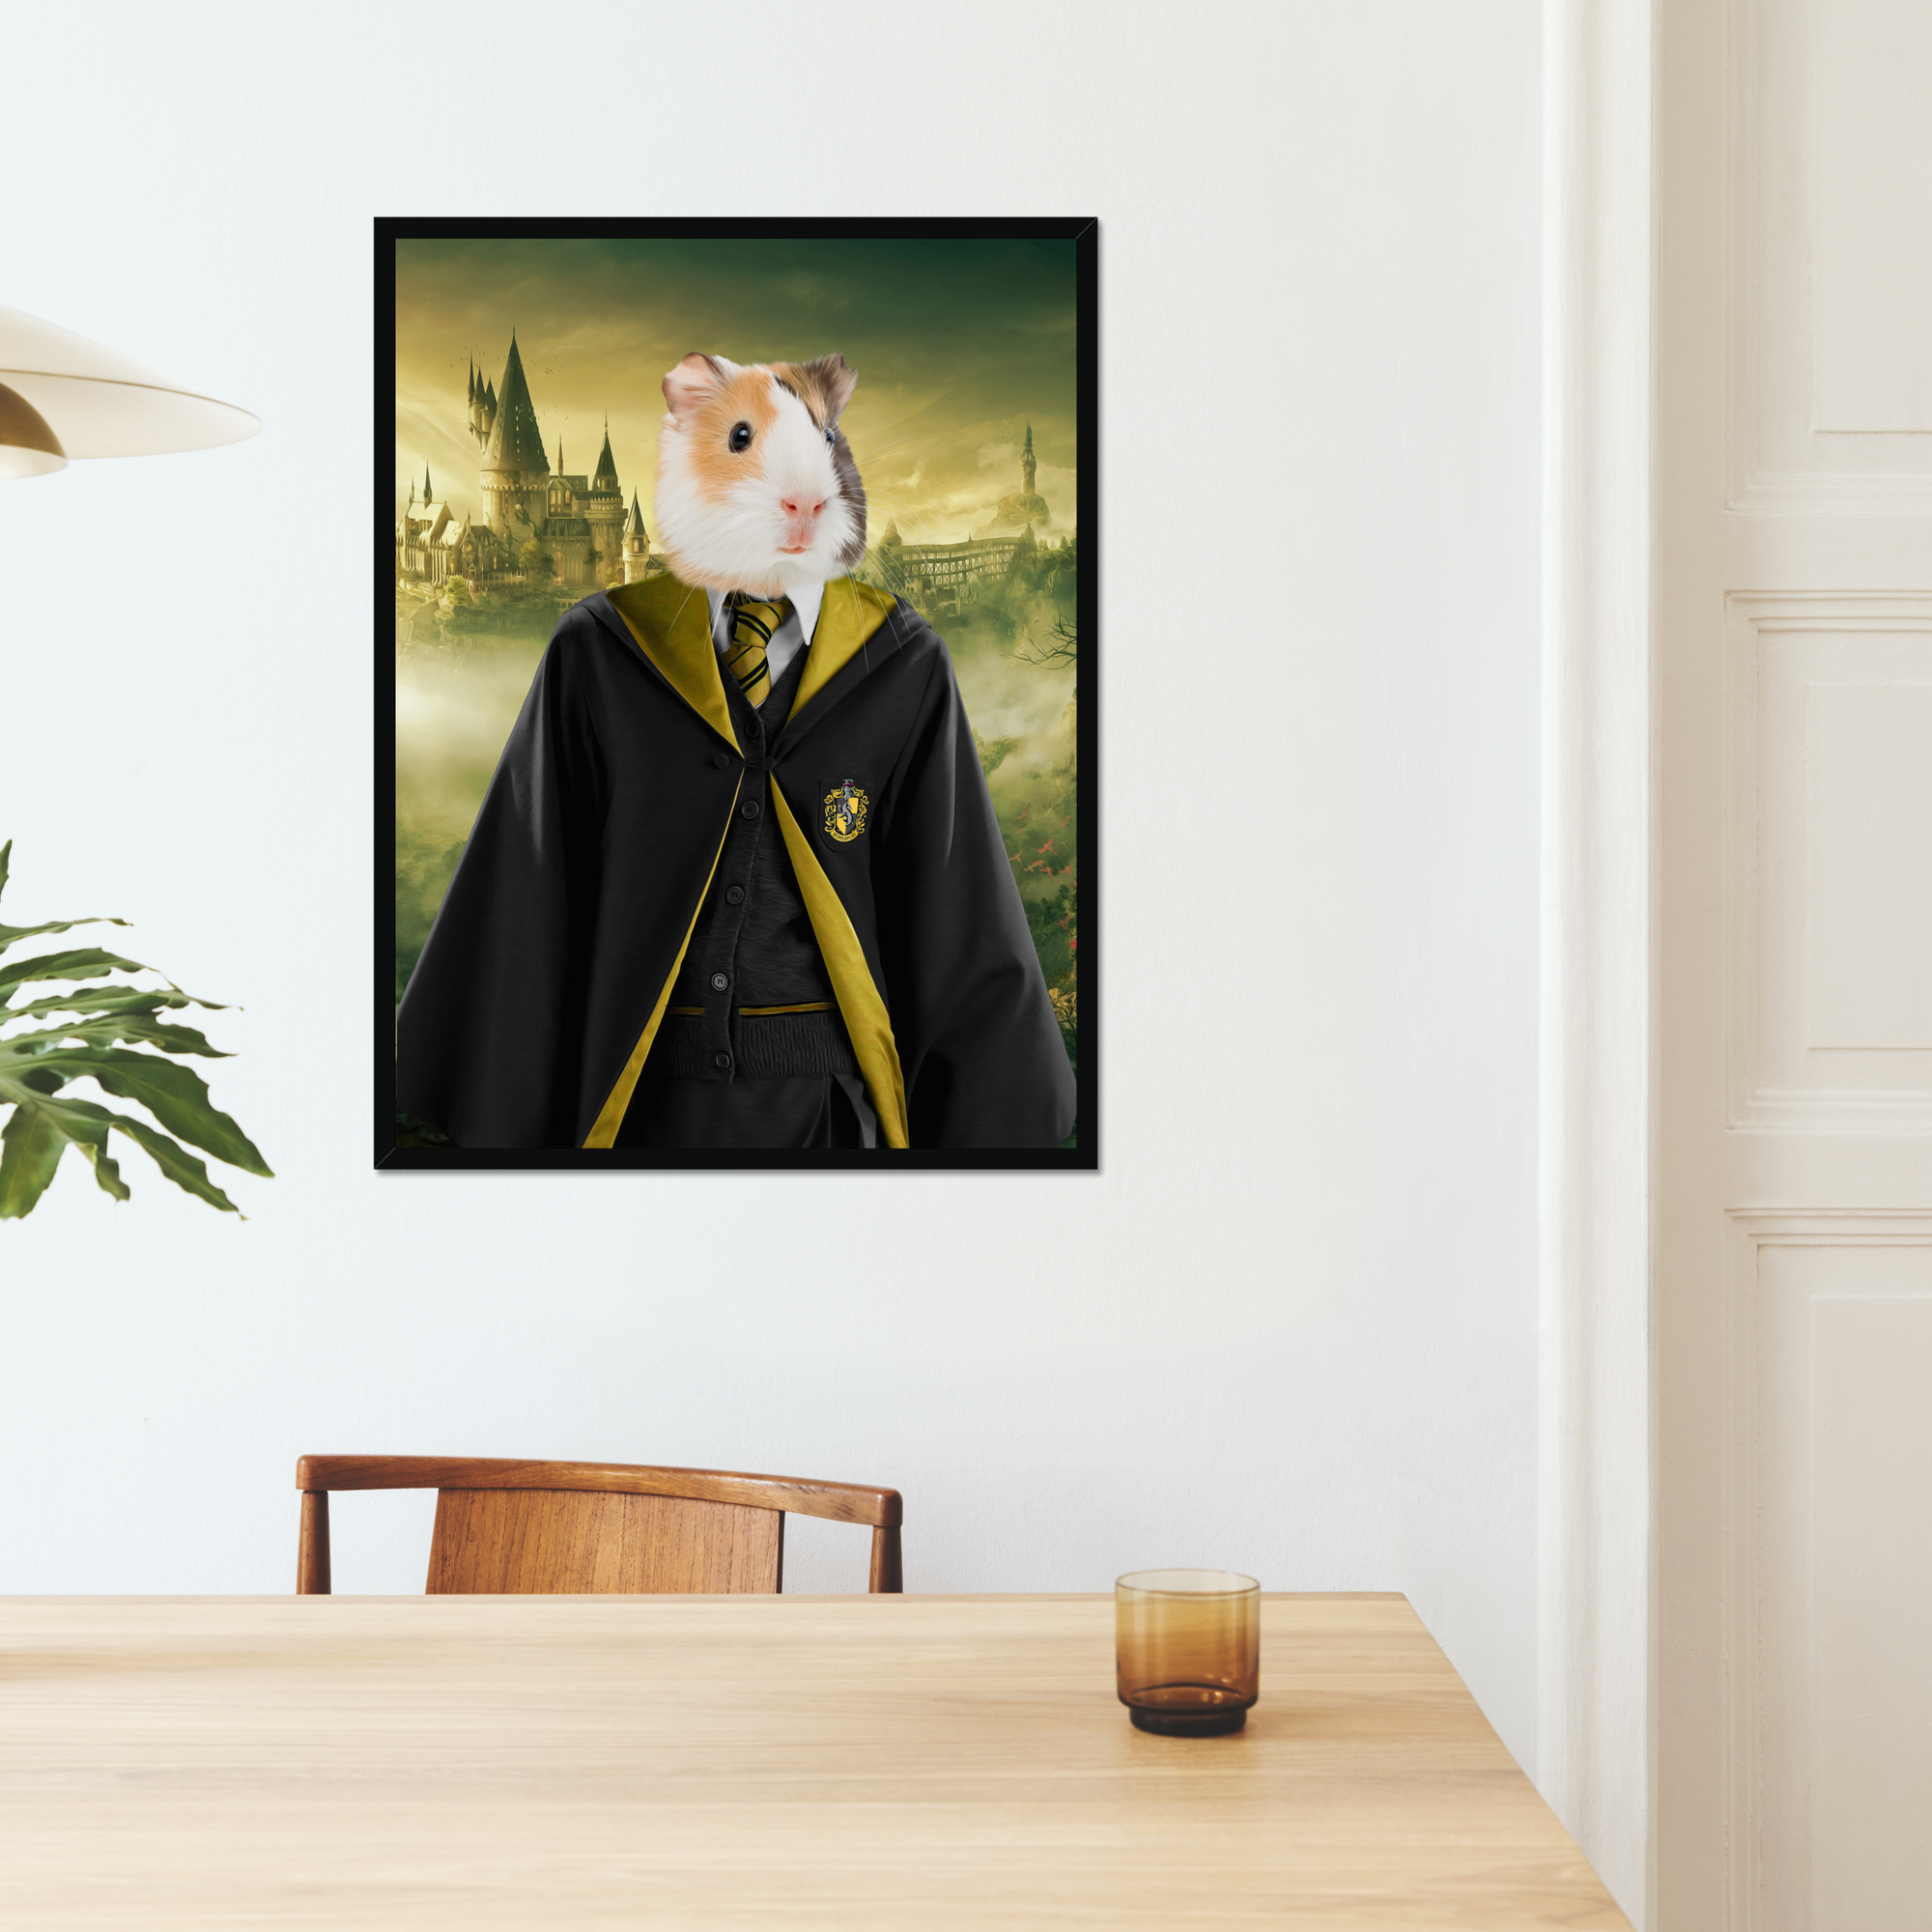 Paw & Glory, paw and glory, animal portraits in oils, Harry Potter animal portrait, Cute animal portrait, Non custom animal paintings, Harry Potter costume, for animal portraits, Animal portrait